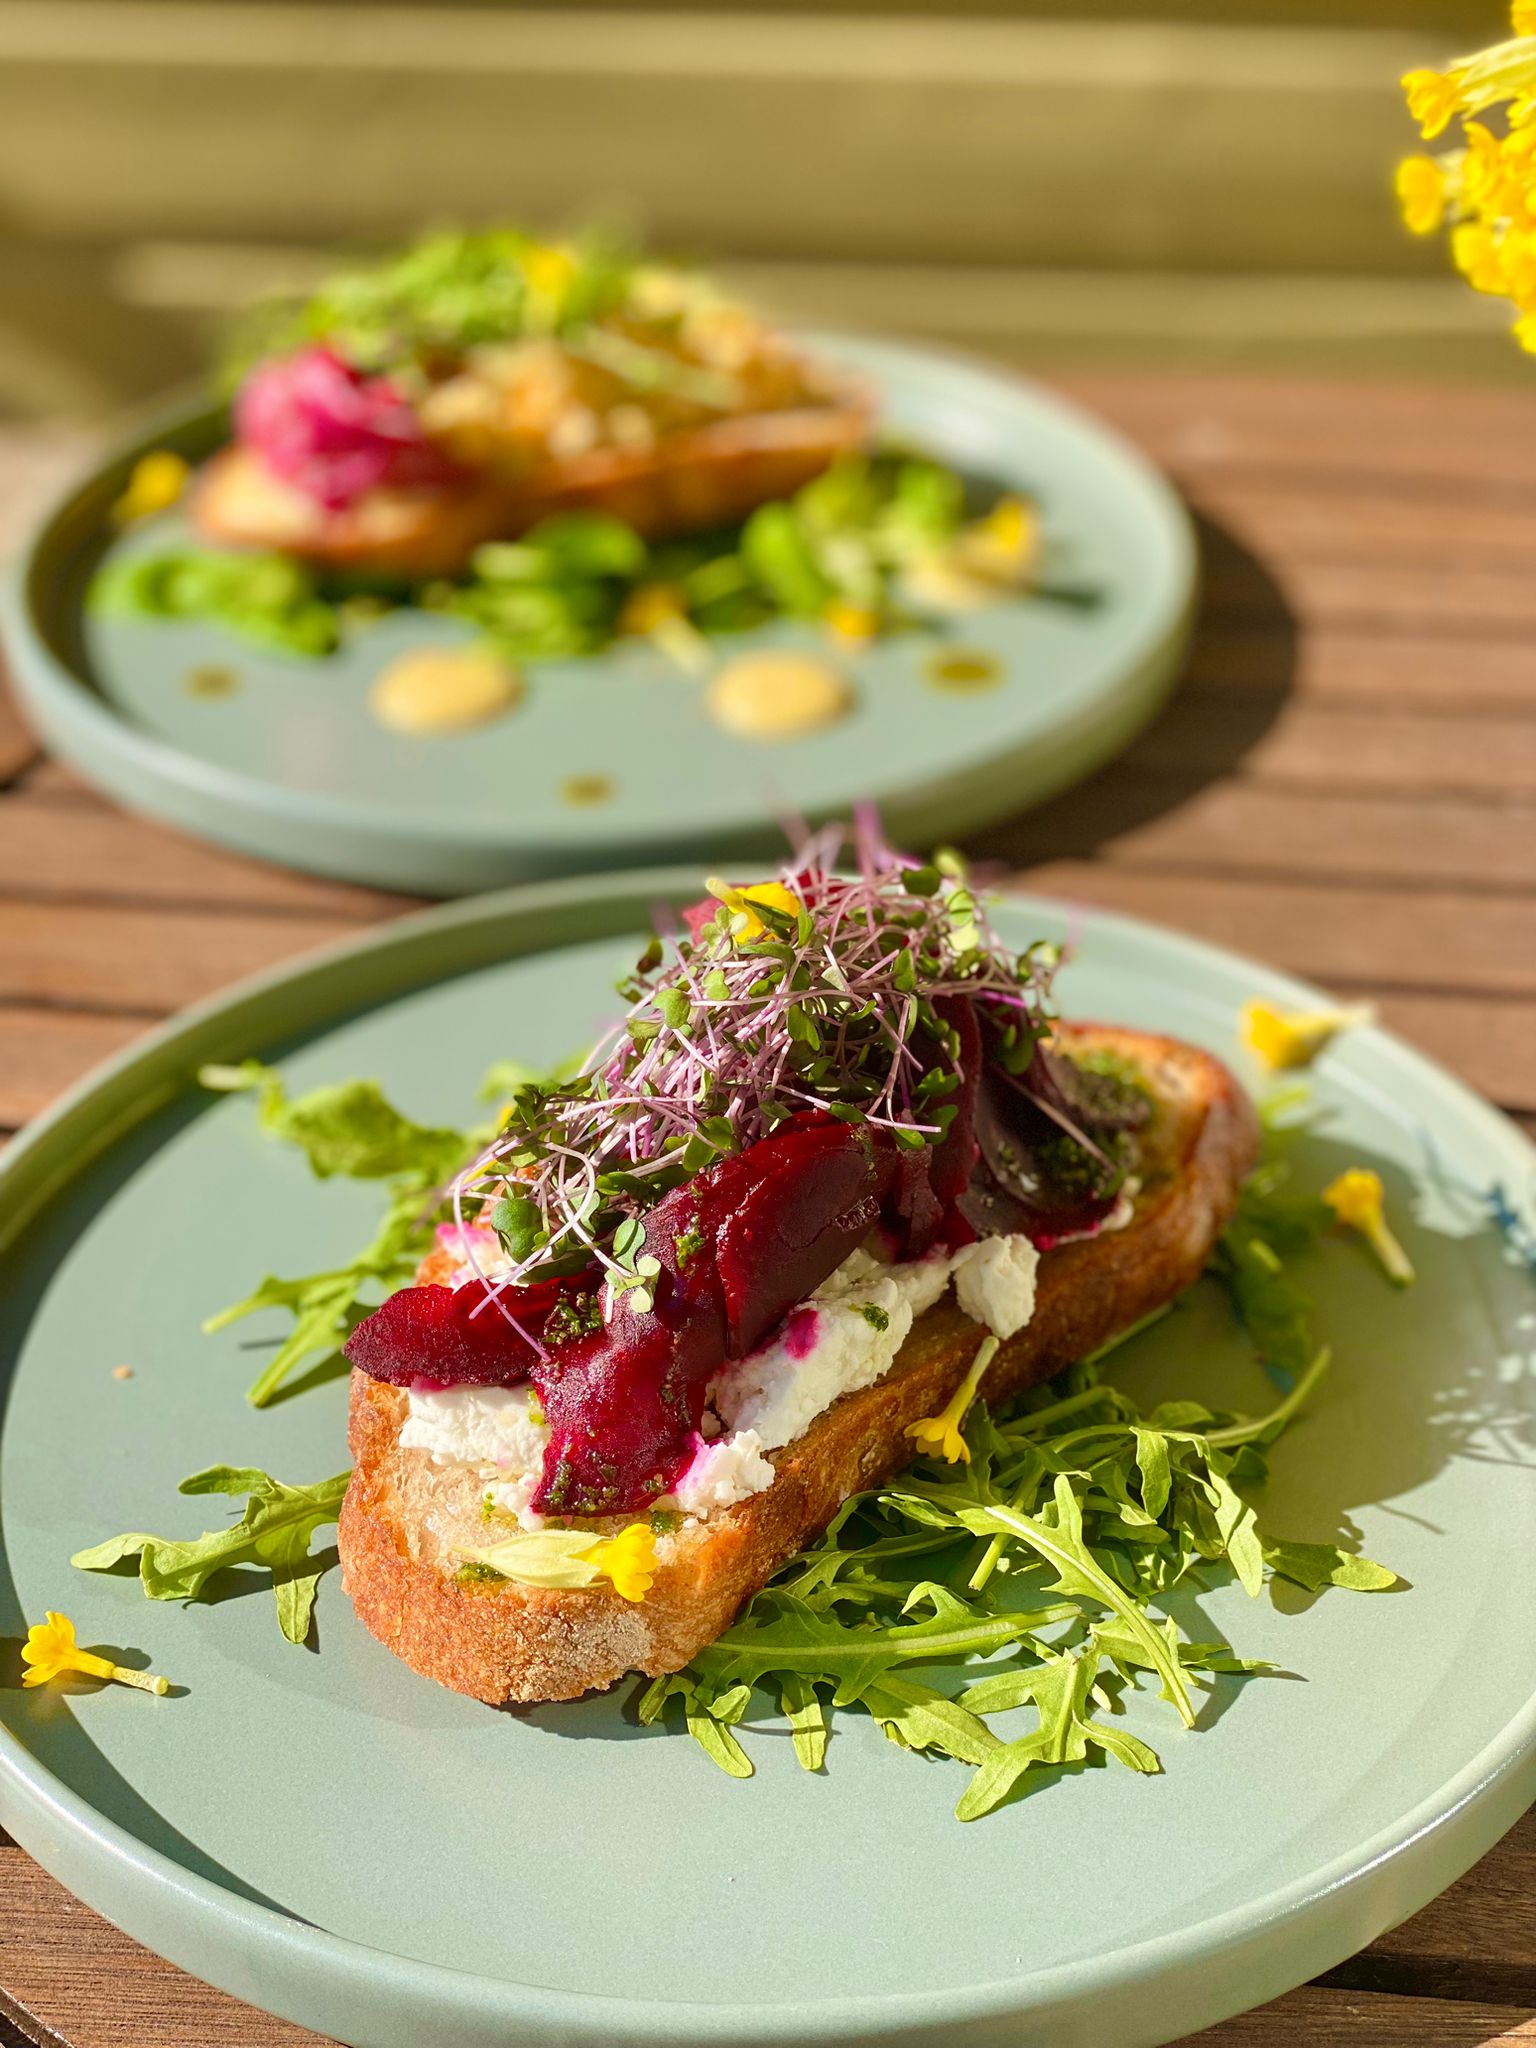 Sourdough bread, beet and goat cheese salad, local food